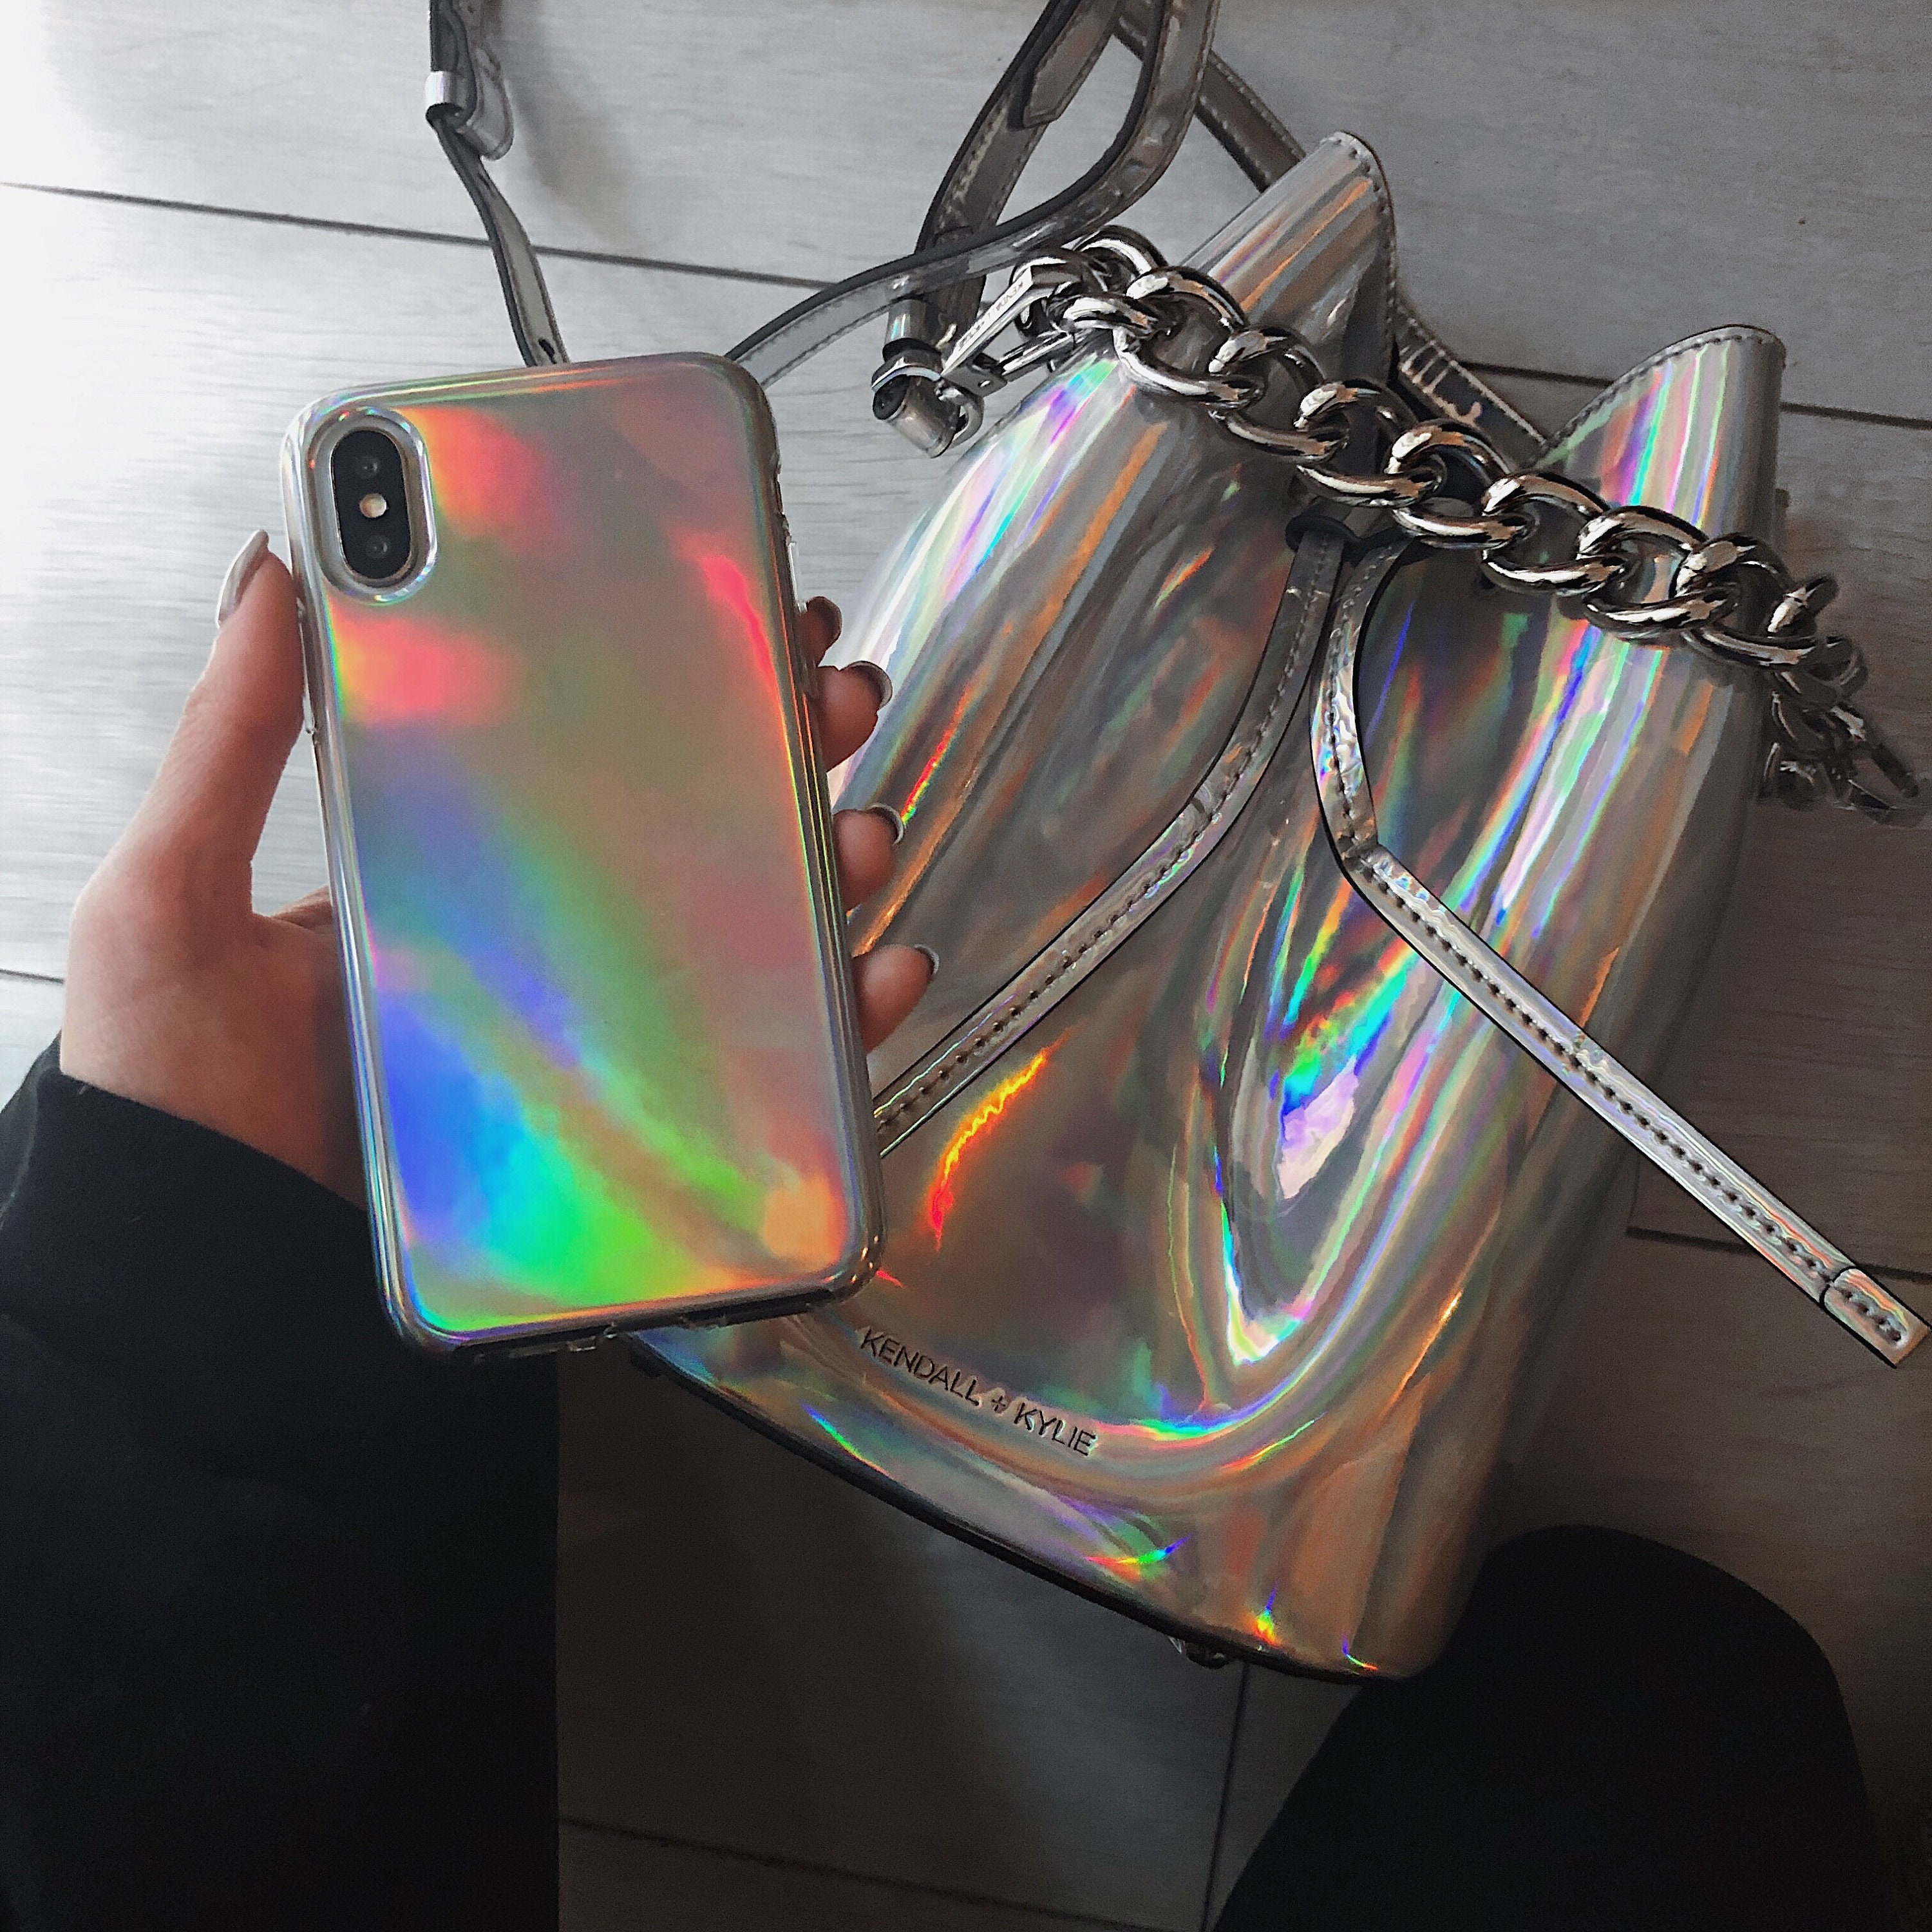  Cocomii Holographic Case Compatible with iPhone 11 Pro - Slim,  Glossy, Shifting Colors, Holographic Streaks, Easy to Hold, Anti-Scratch,  Shockproof (Rainbow) : Cell Phones & Accessories